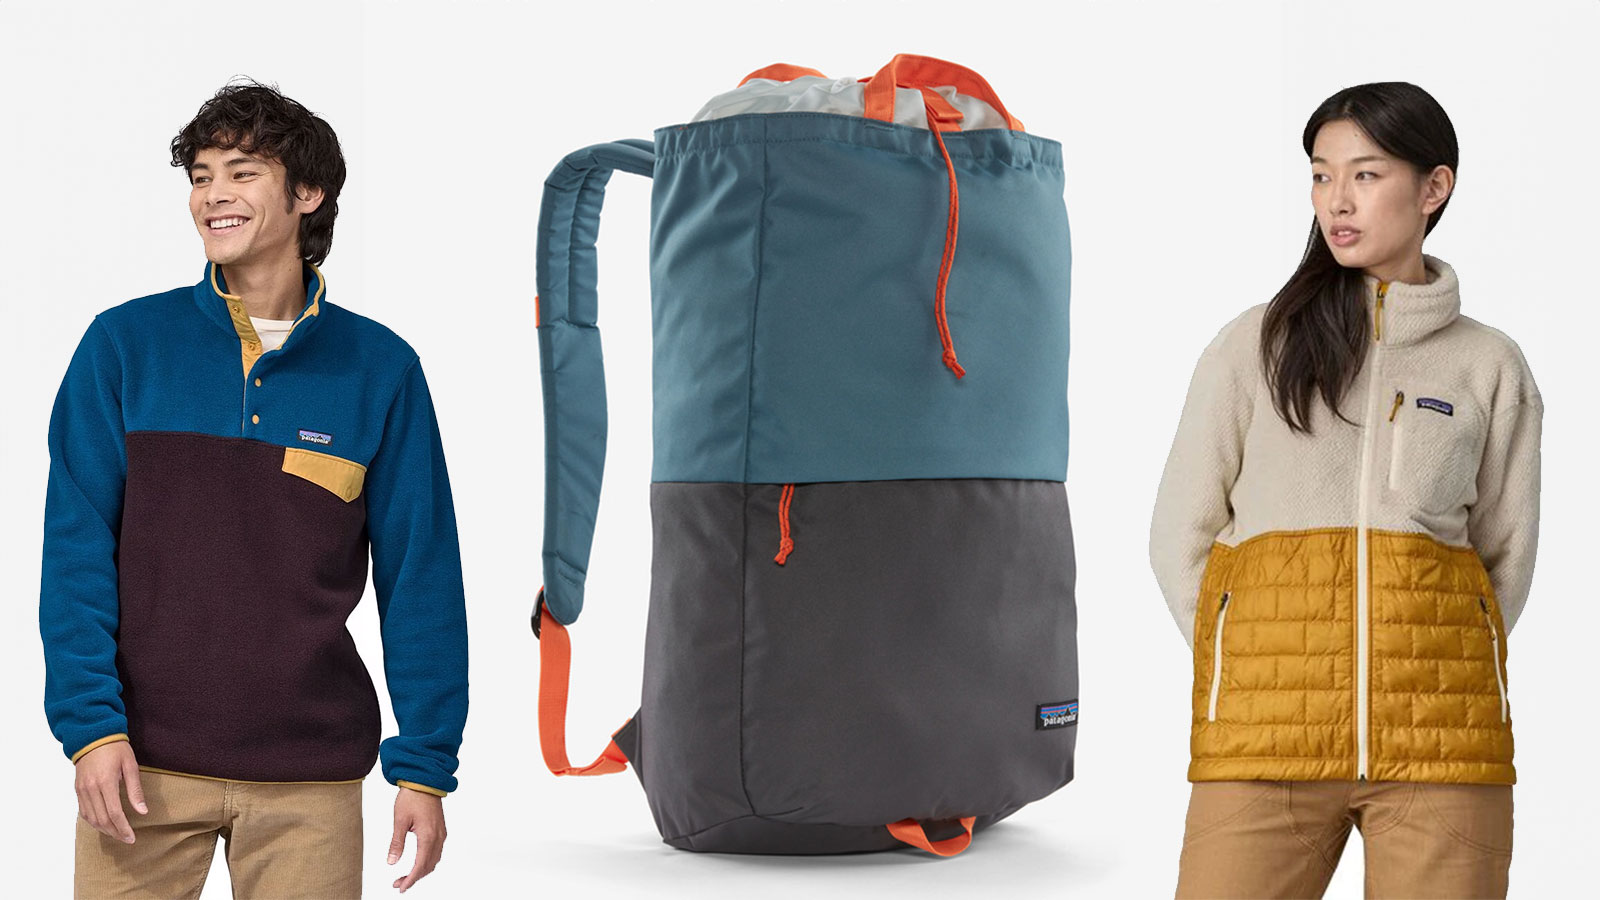 Two people wearing Patagonia jackets and a large Patagonia bag